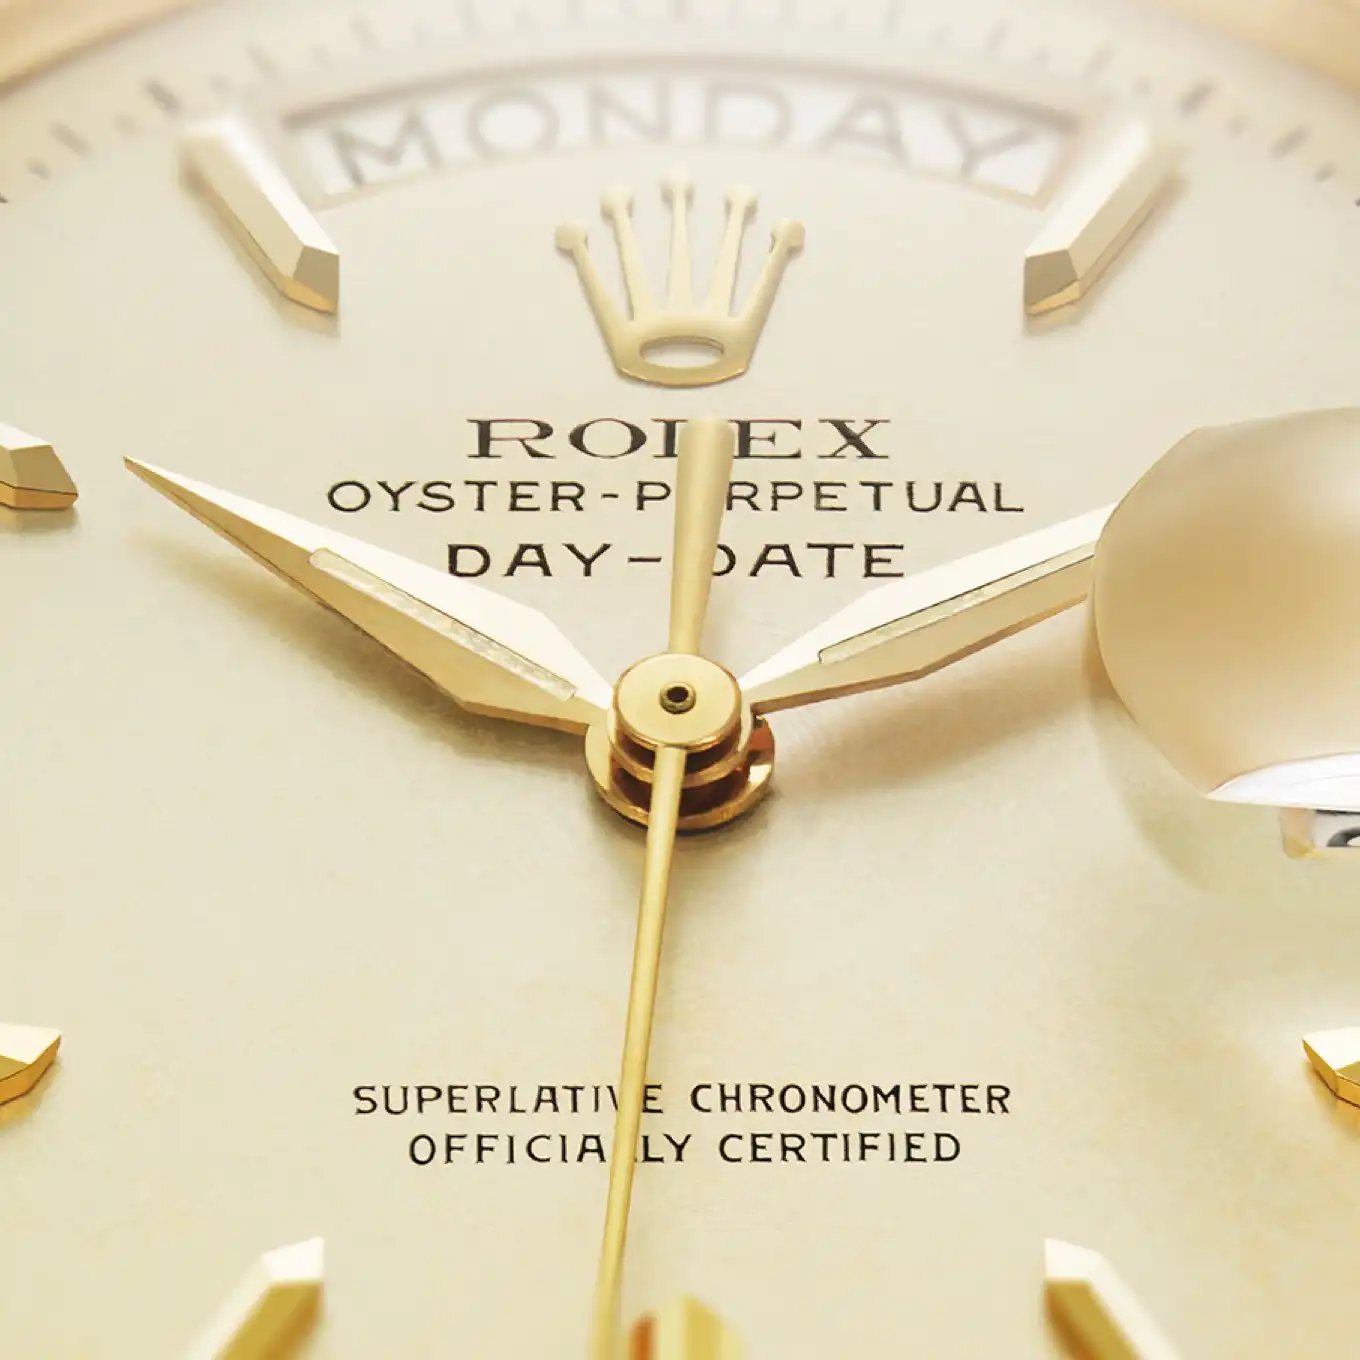 A SUPERLATIVE APPROACH TO WATCHMAKING